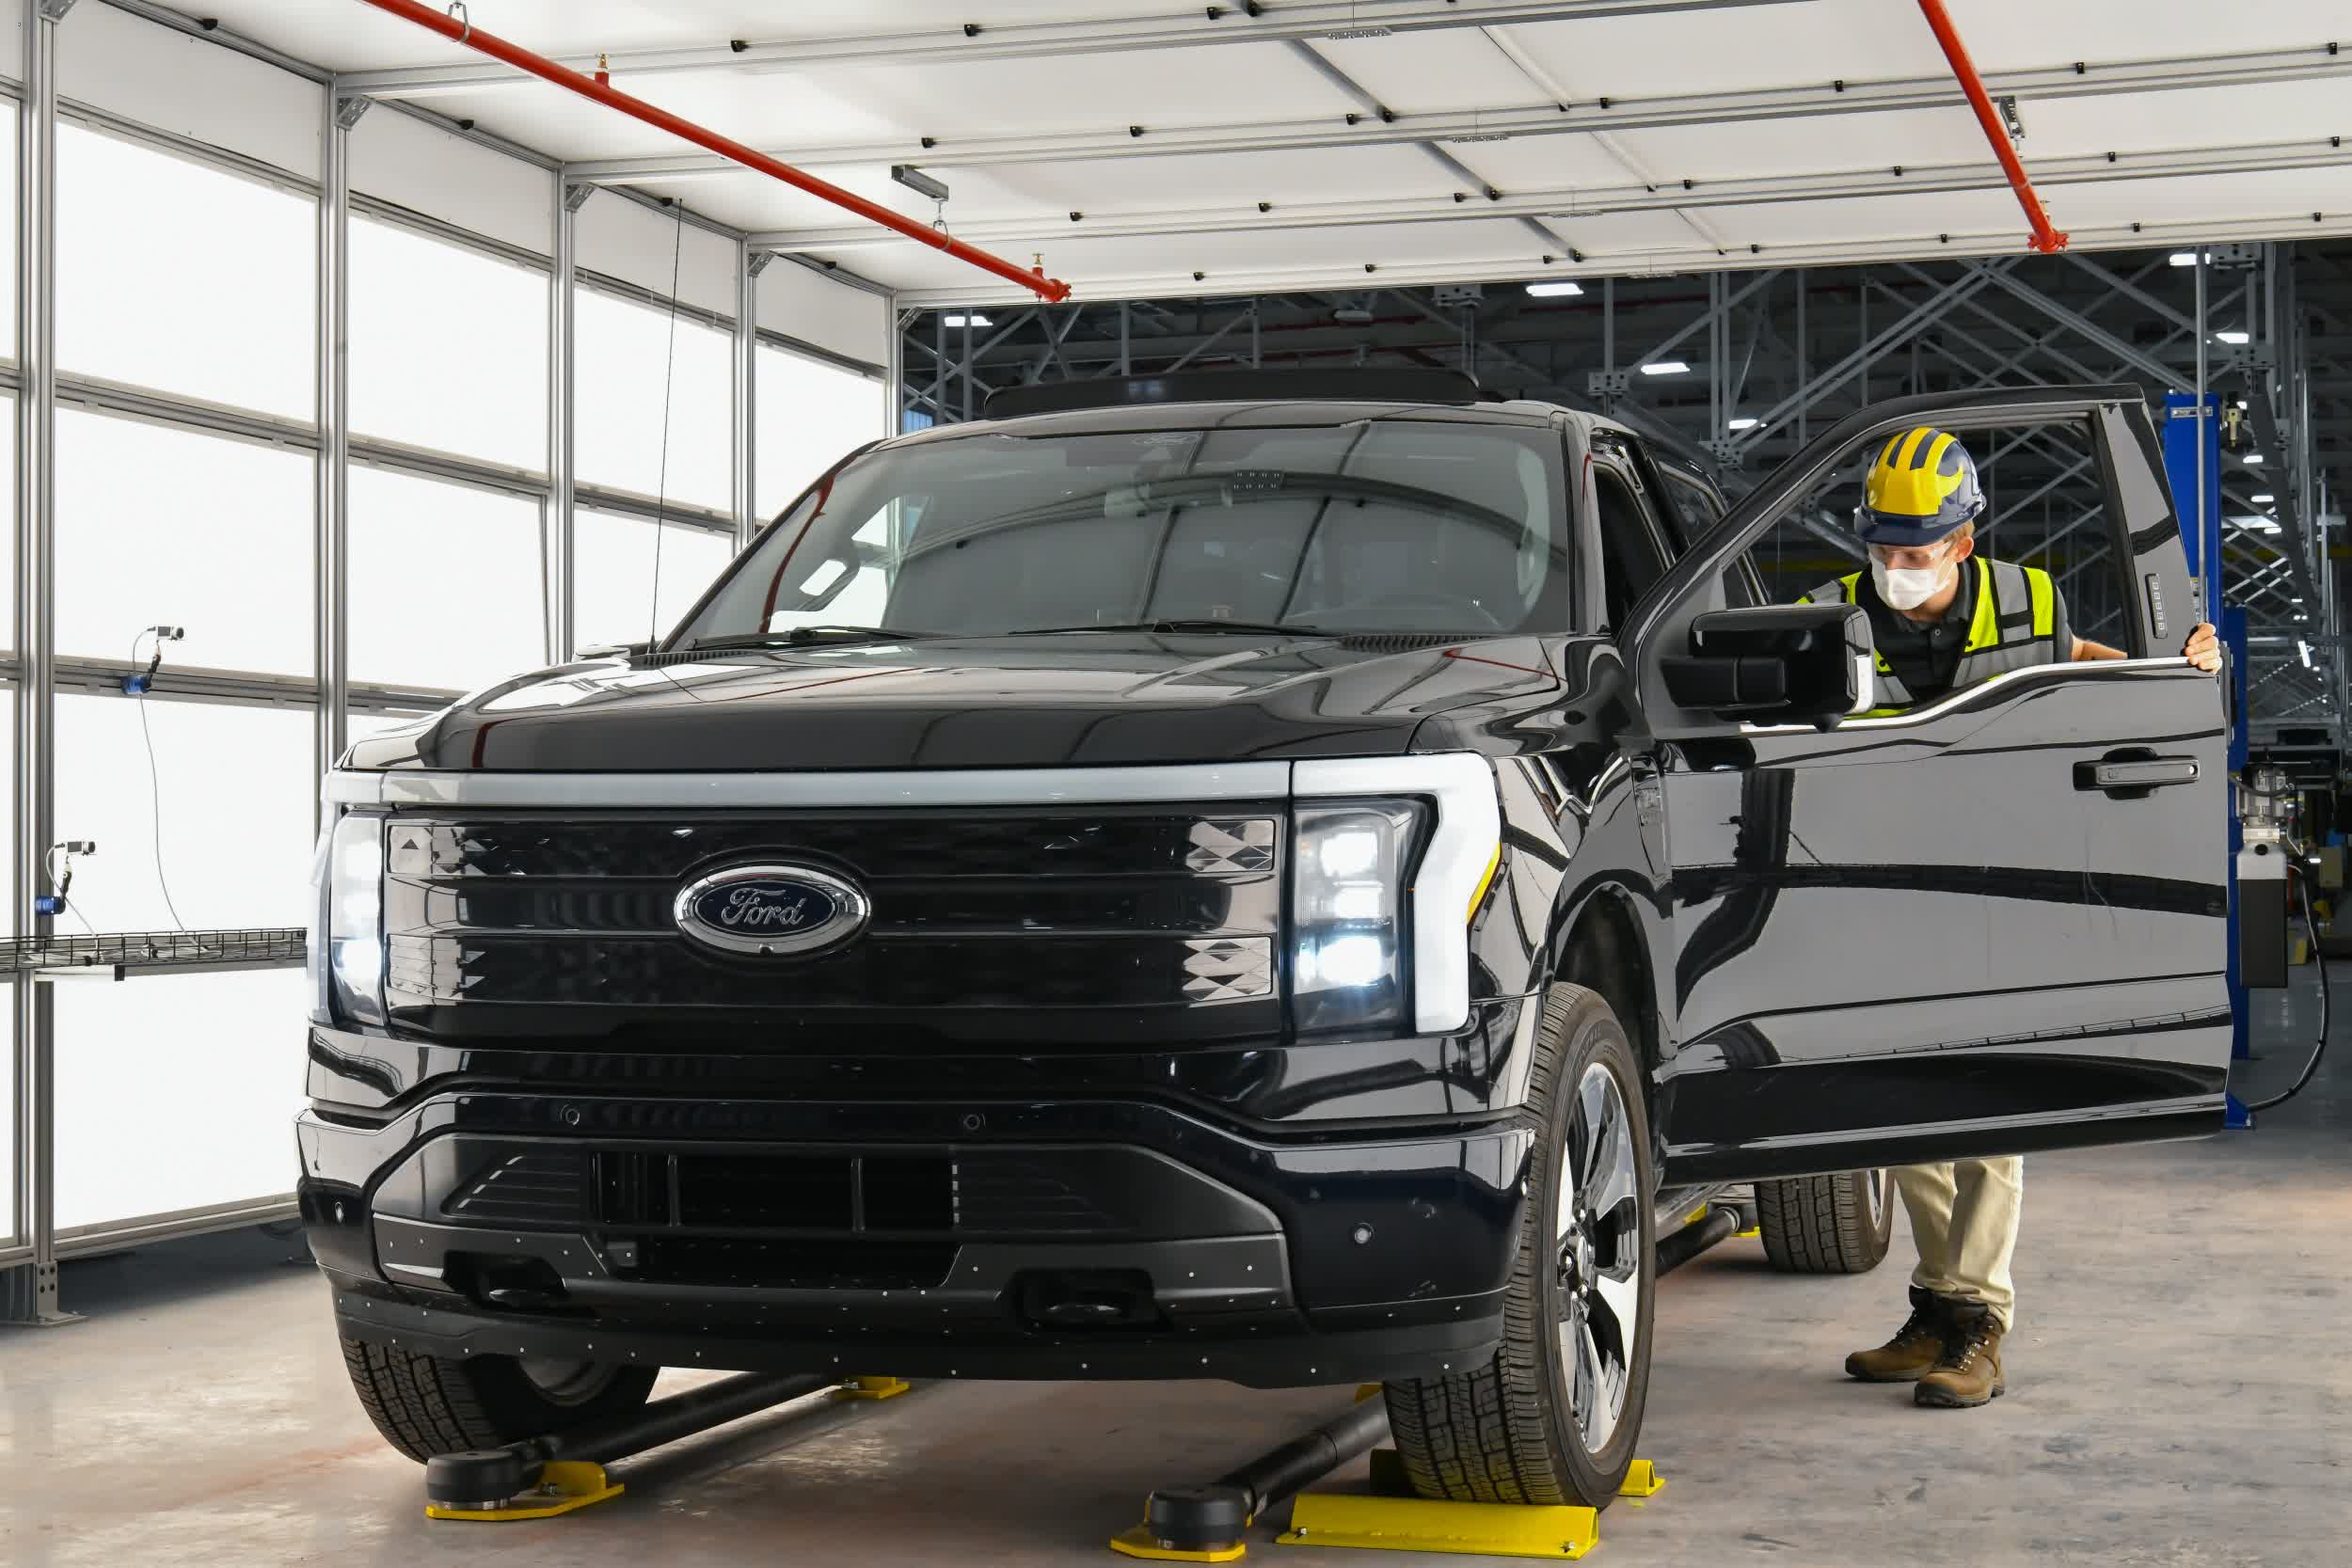 Ford's all-electric F-150 Lightning rated for up to 320 miles of range